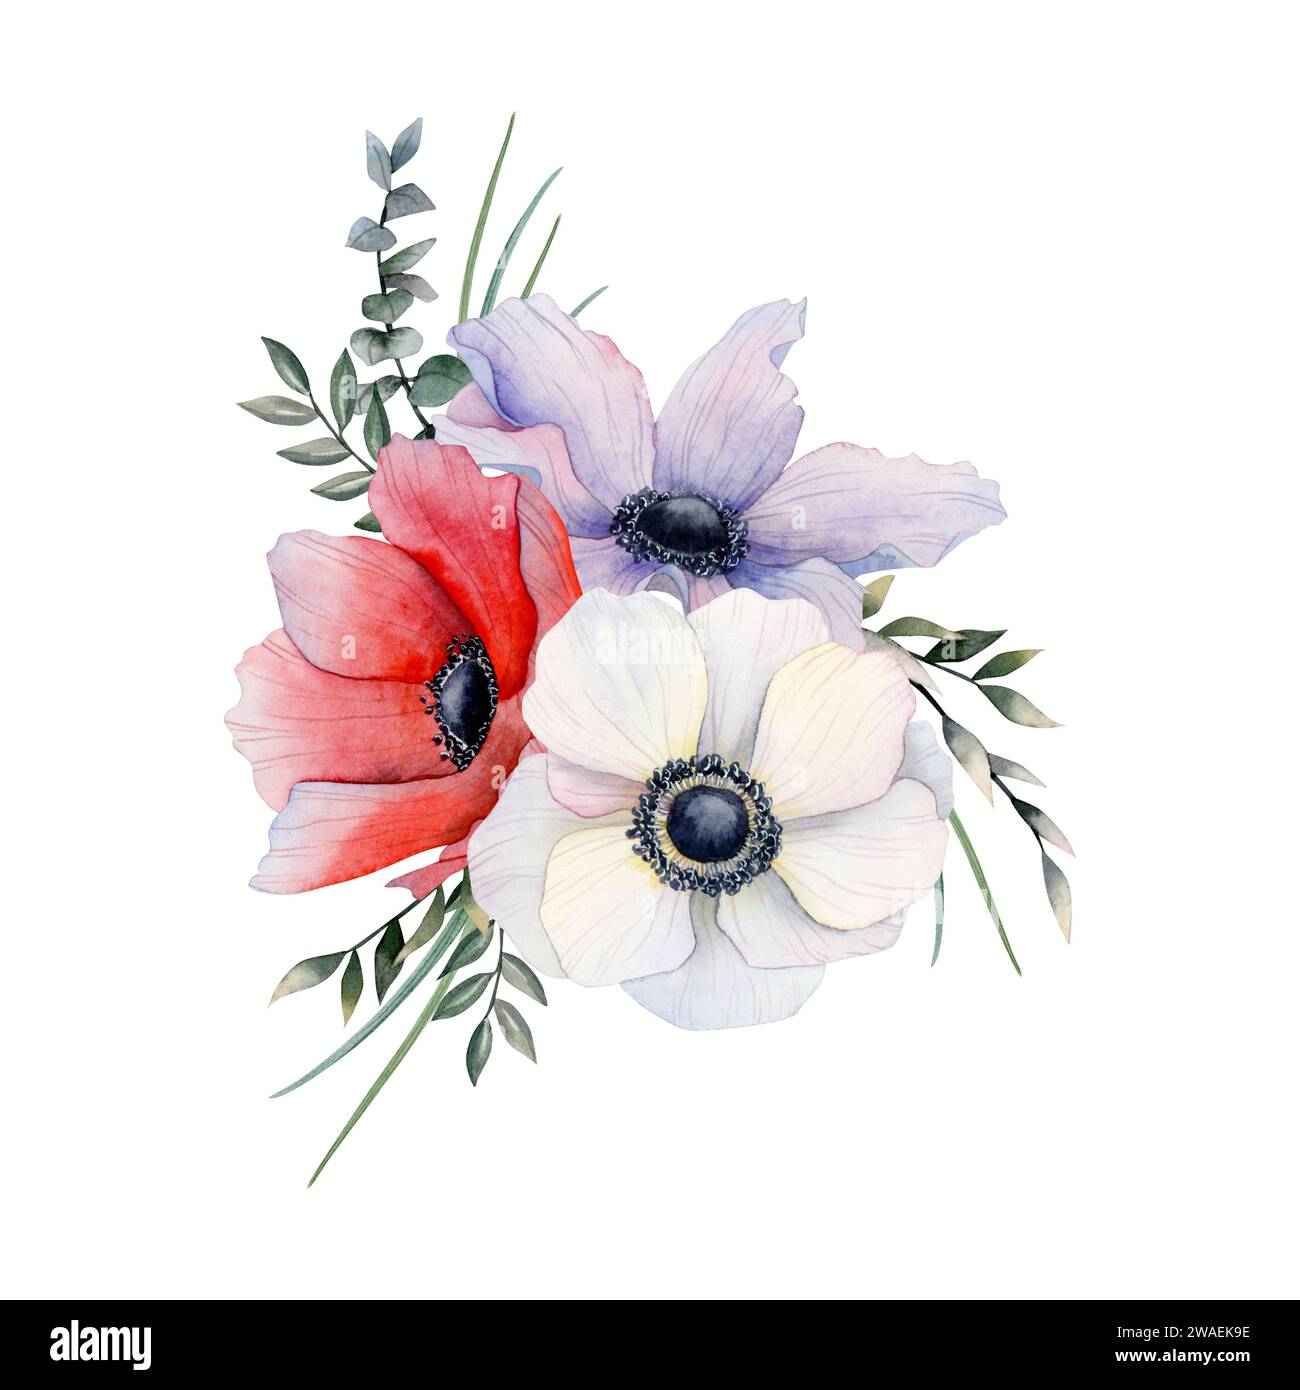 Field flowers bouquet of purple, white and red anemones with eucalyptus and grass watercolor illustration. Field poppies Stock Photo